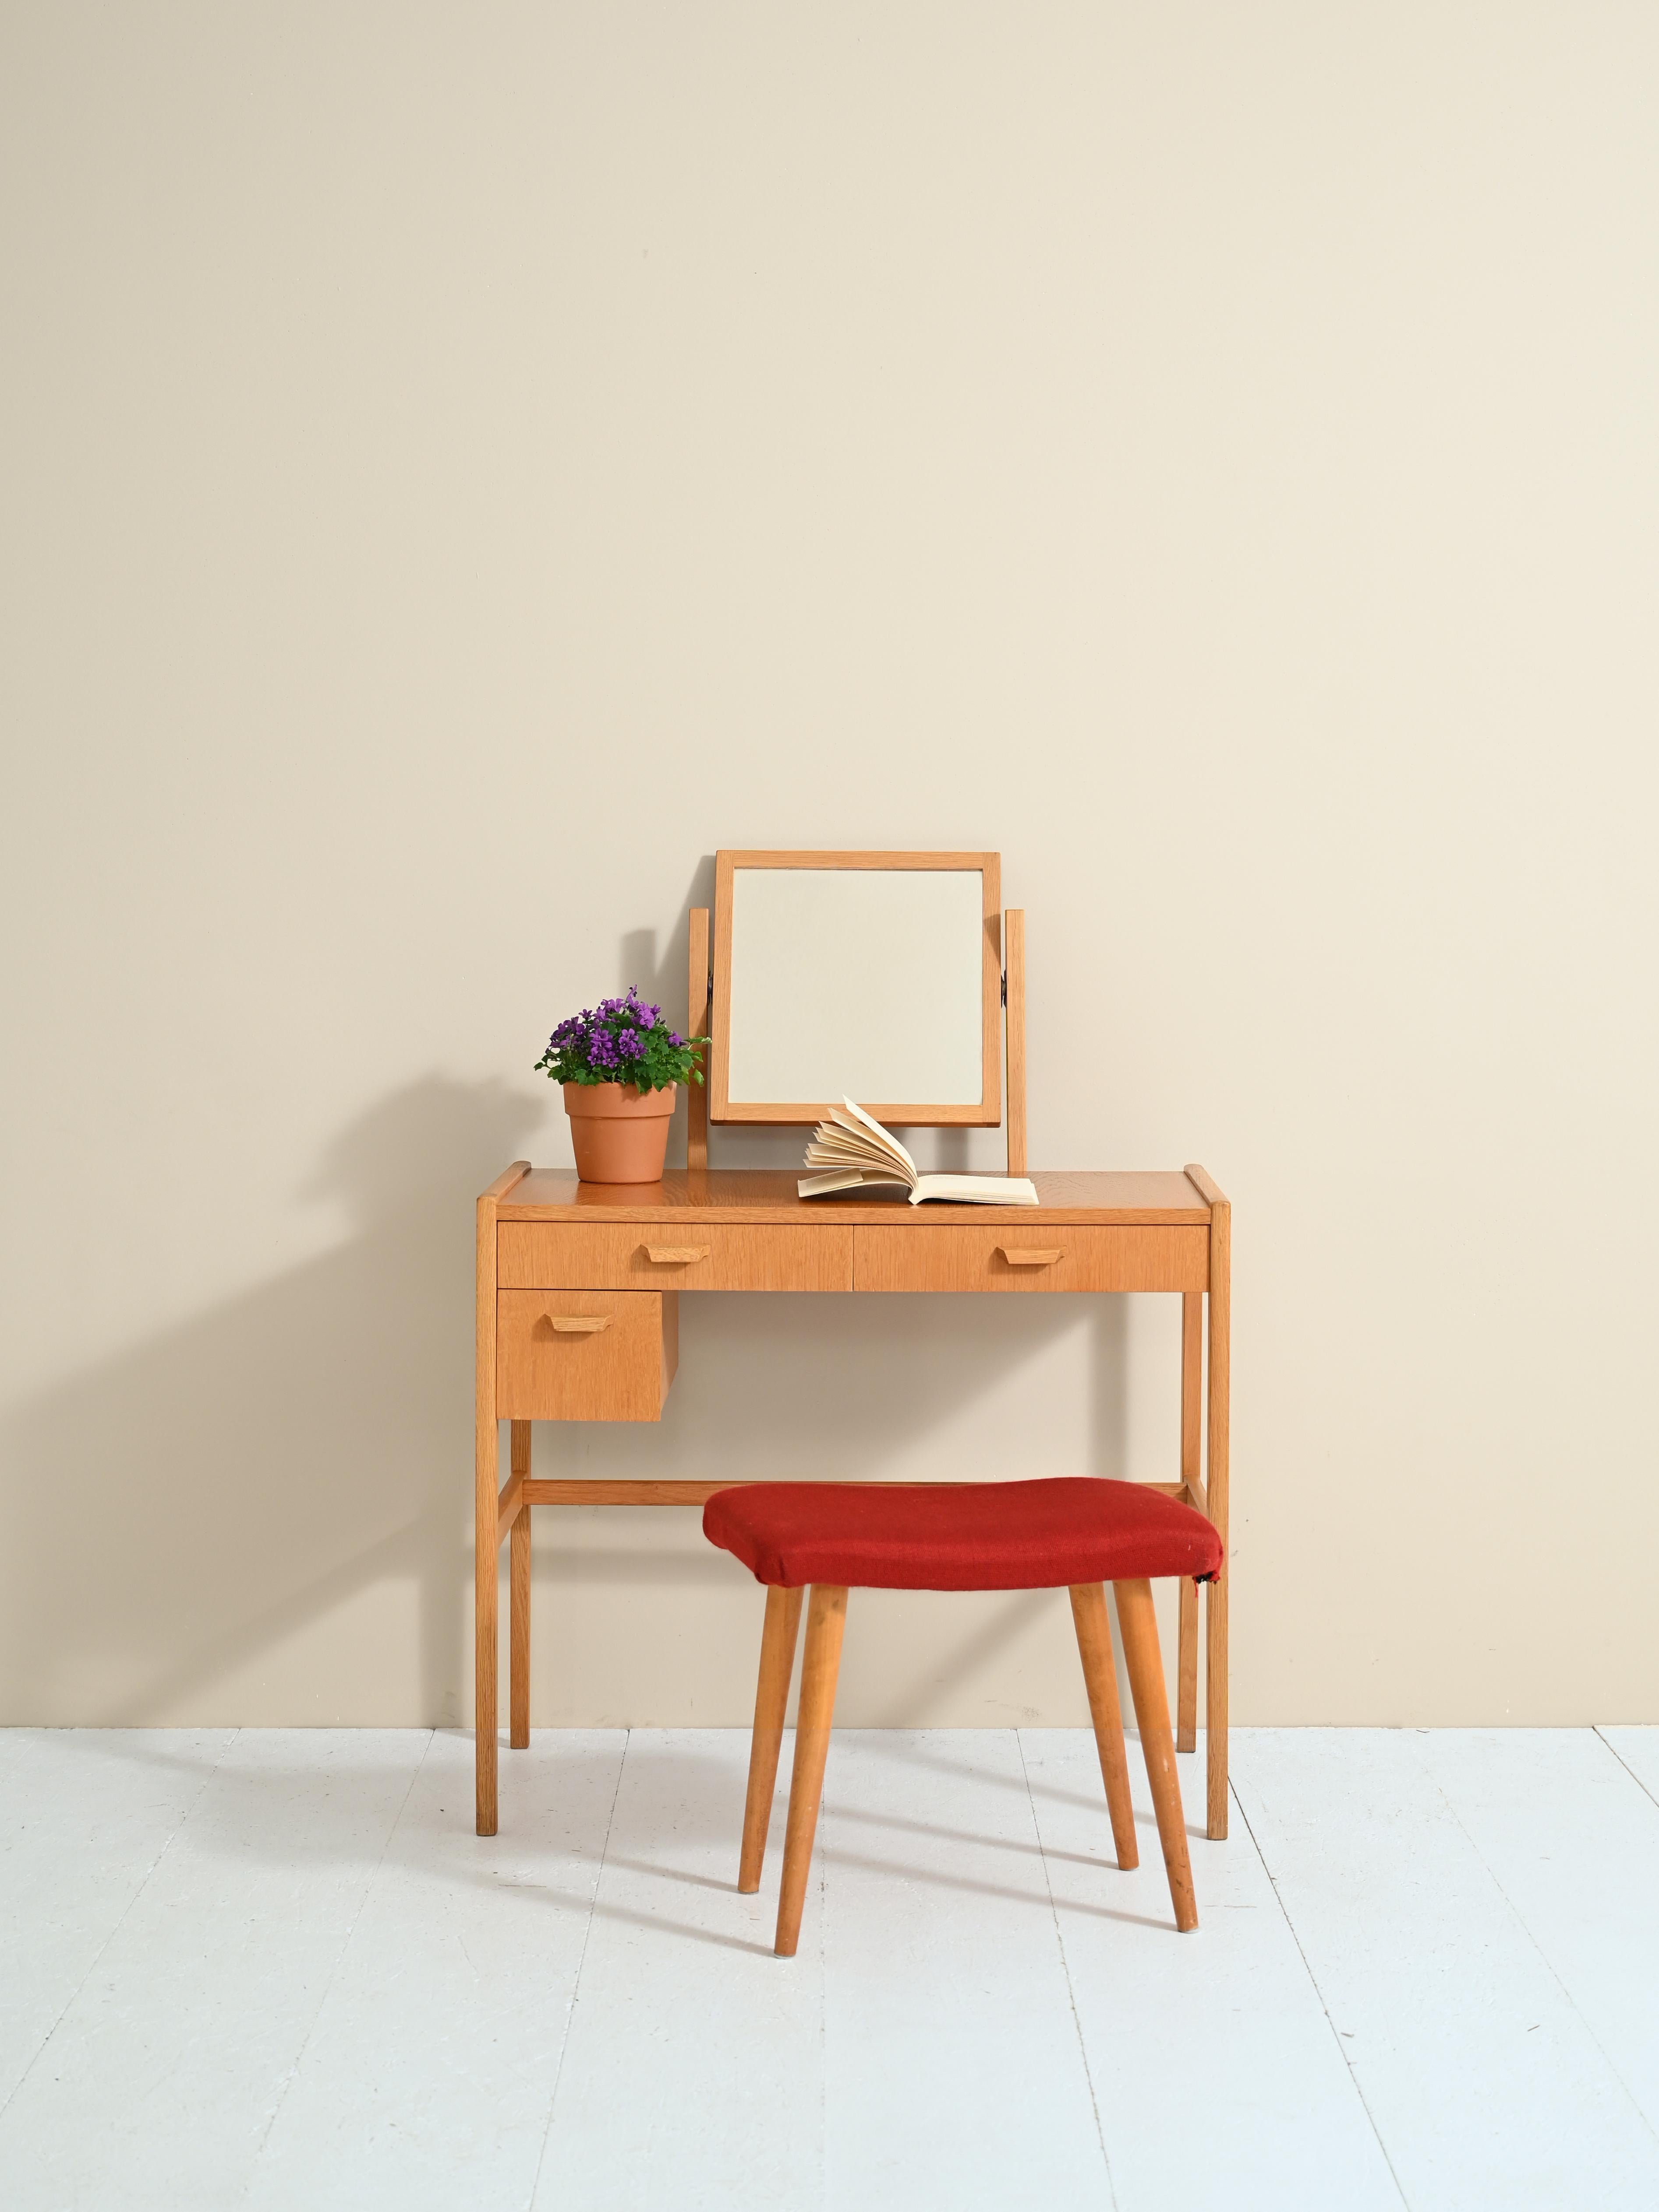 Small oak desk with mirror.
Features long tapered legs and three drawers with wooden handles.
The small size makes it perfect for placing in the bedroom as well with the dual function of dressing table and desk.

Good condition. A conservative